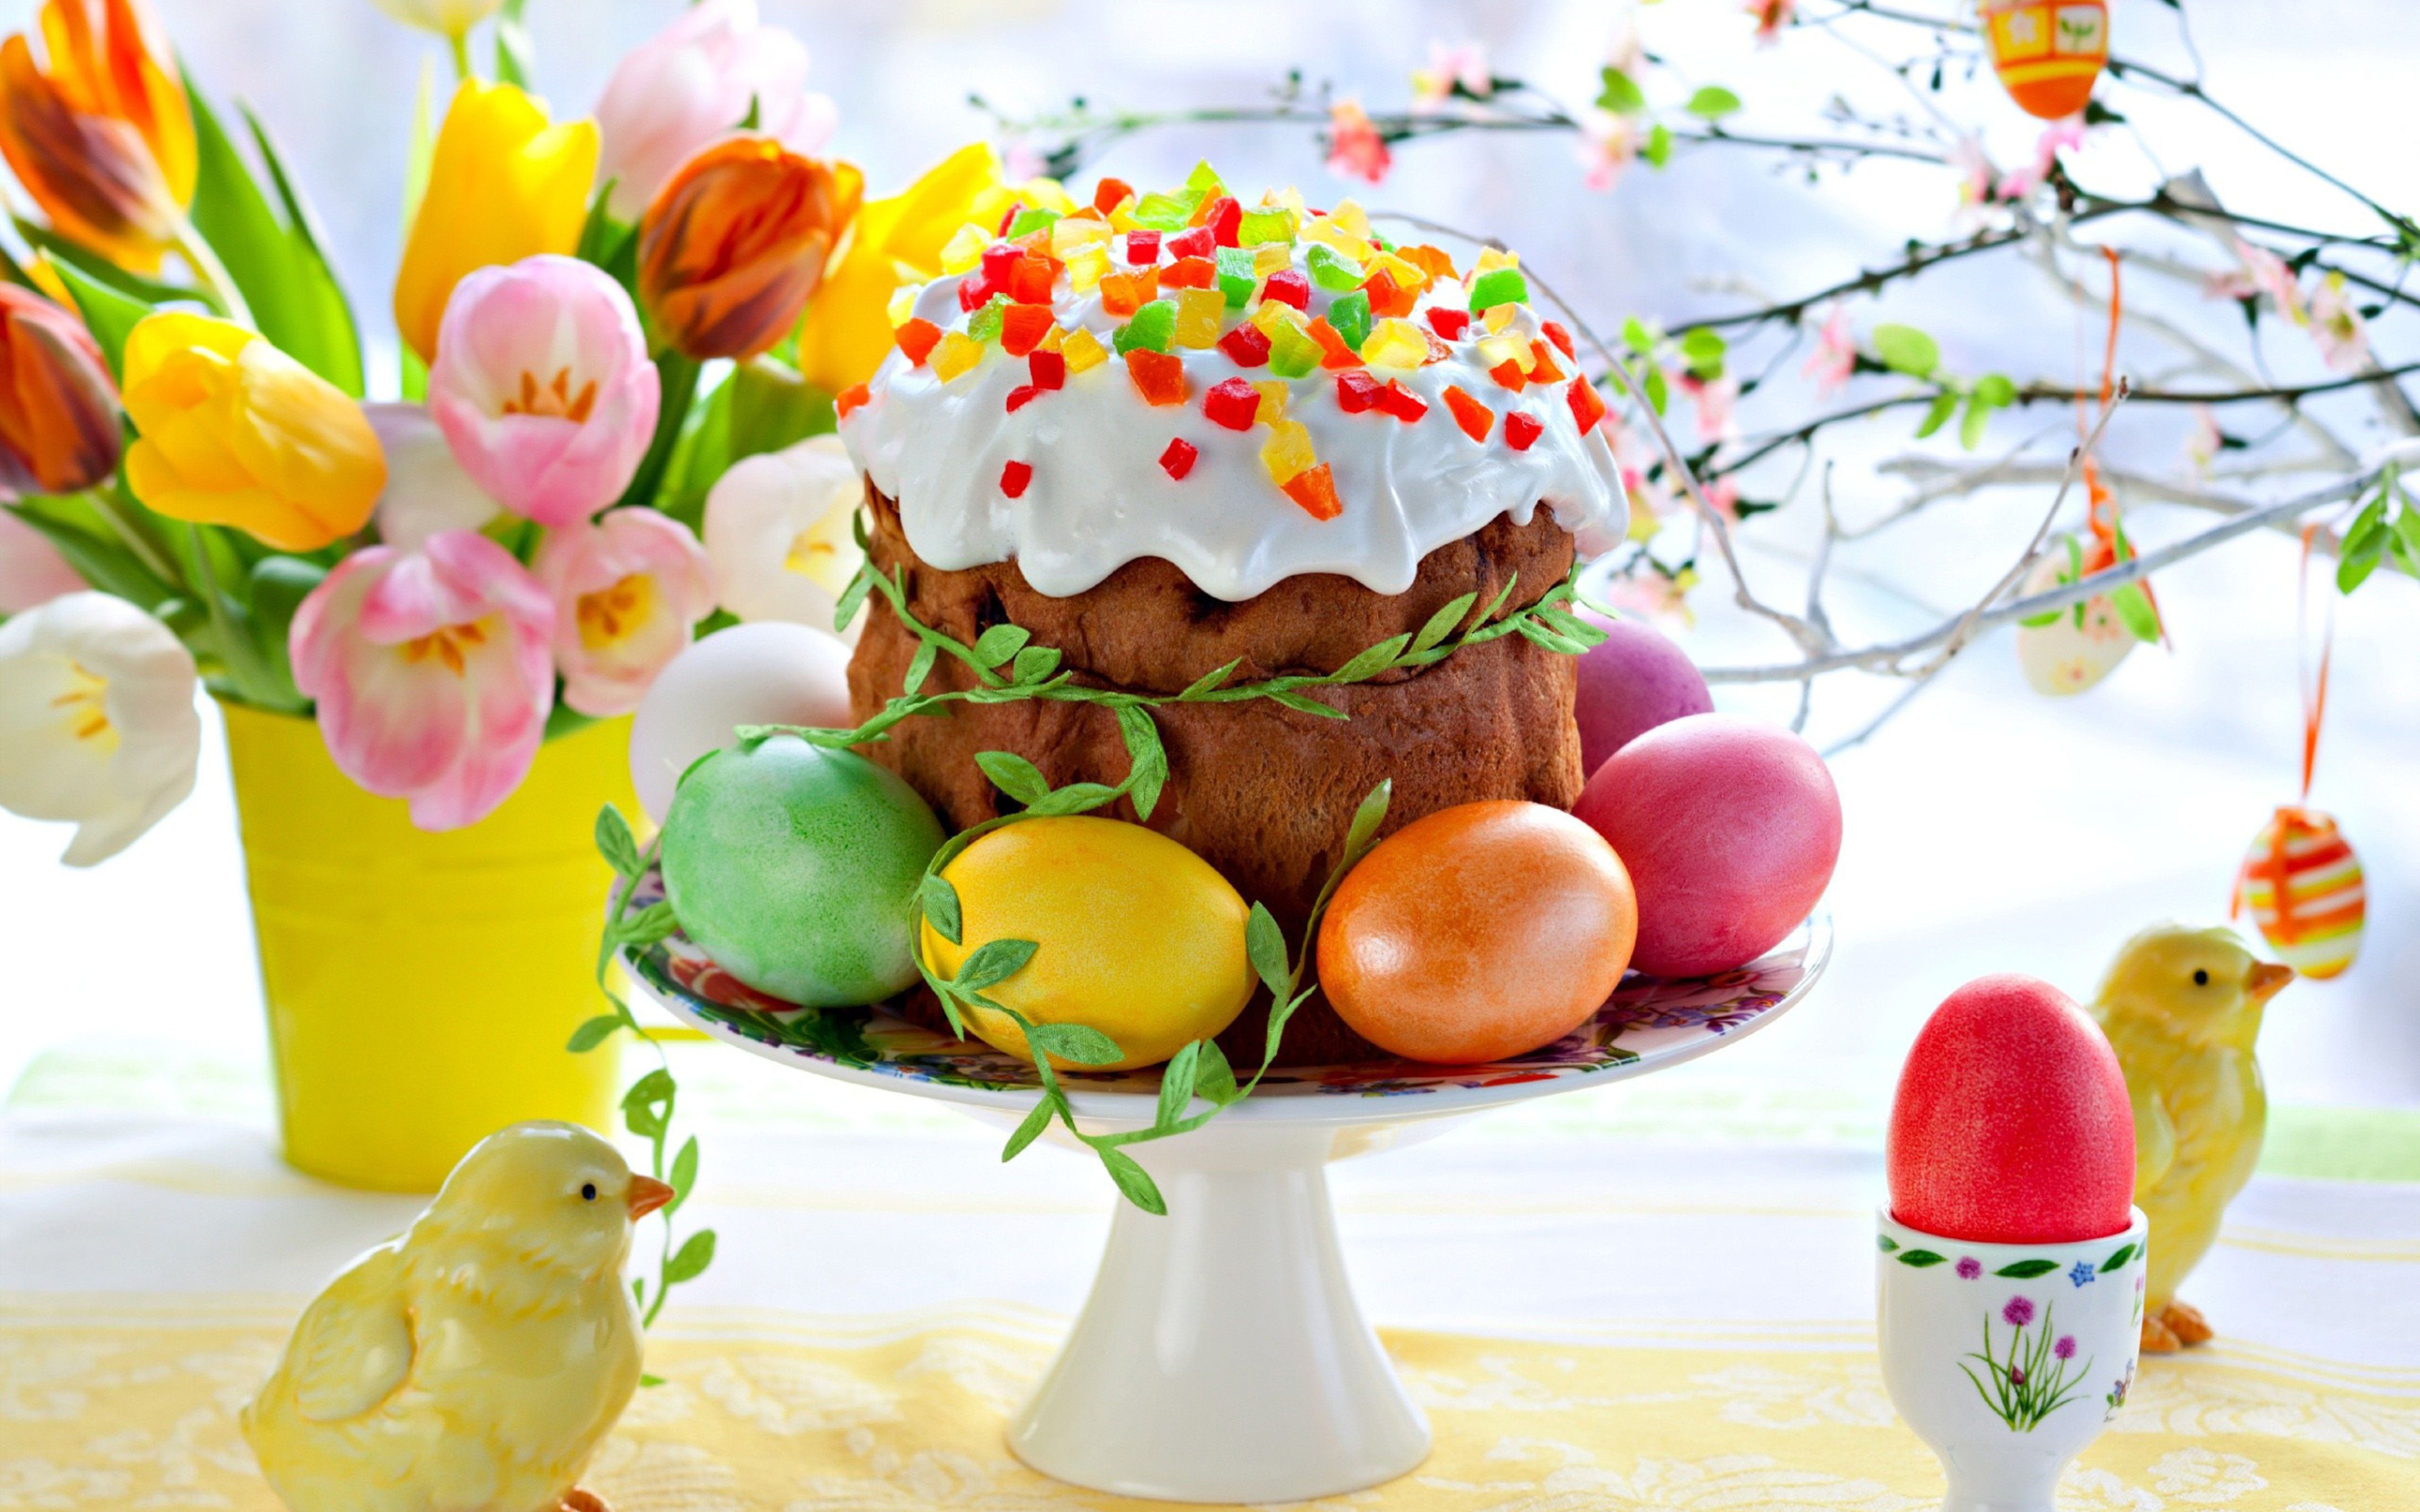 Special cake and painted eggs